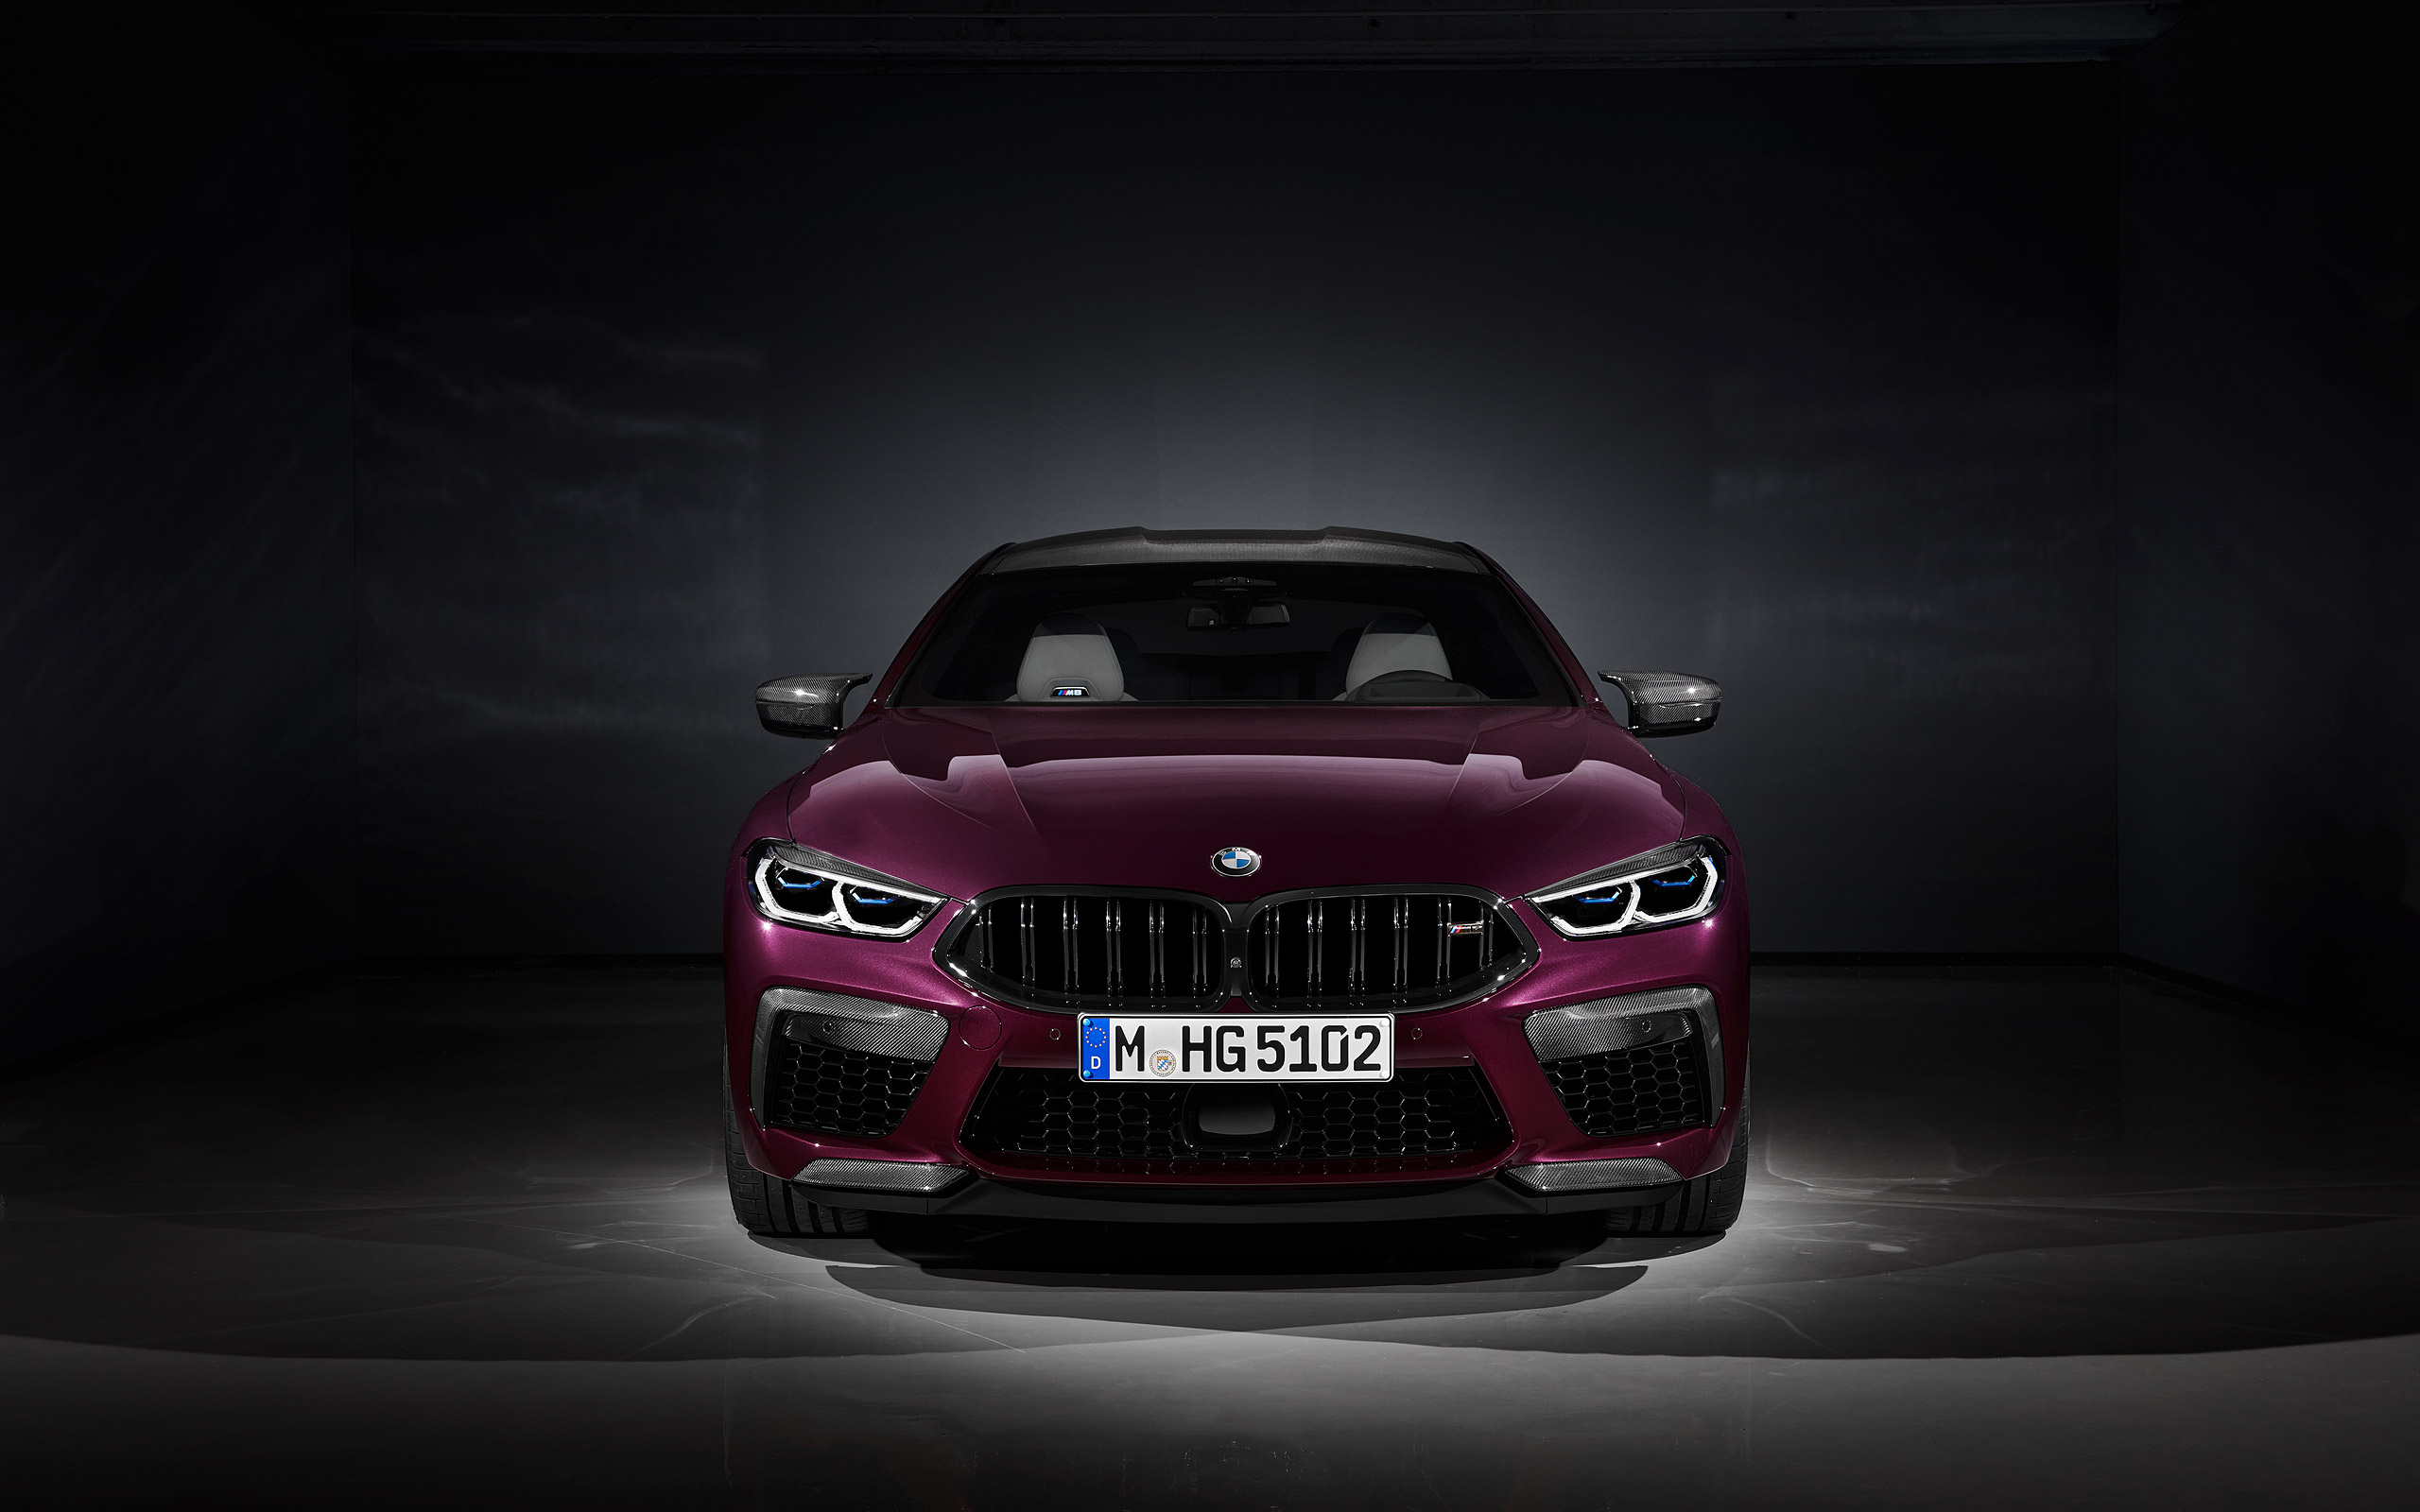  2020 BMW M8 Competition Wallpaper.